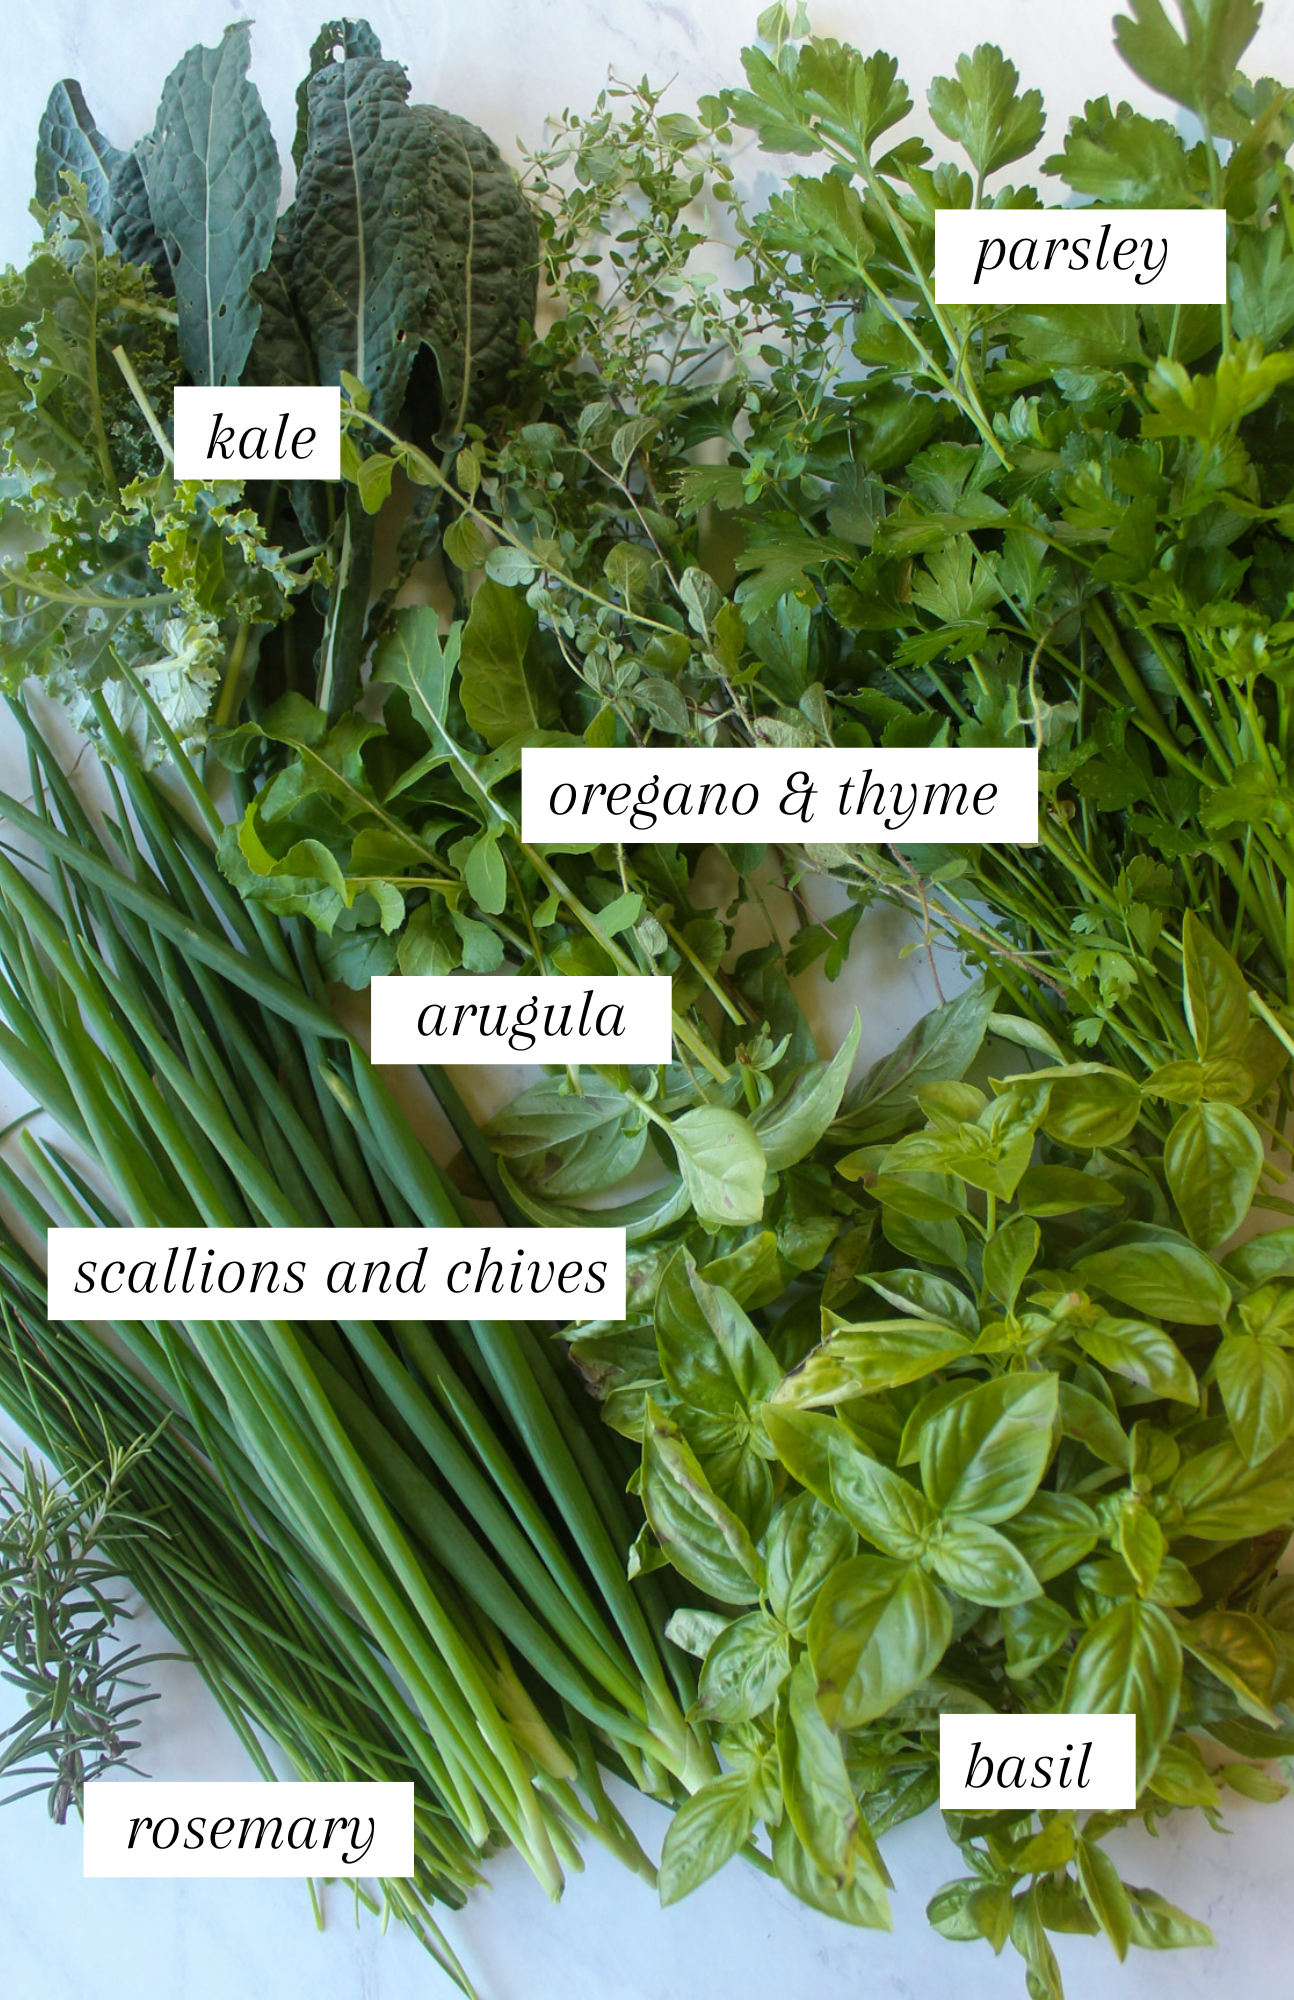 Labeled ingredients for fresh herbs and greens from the garden to be frozen.